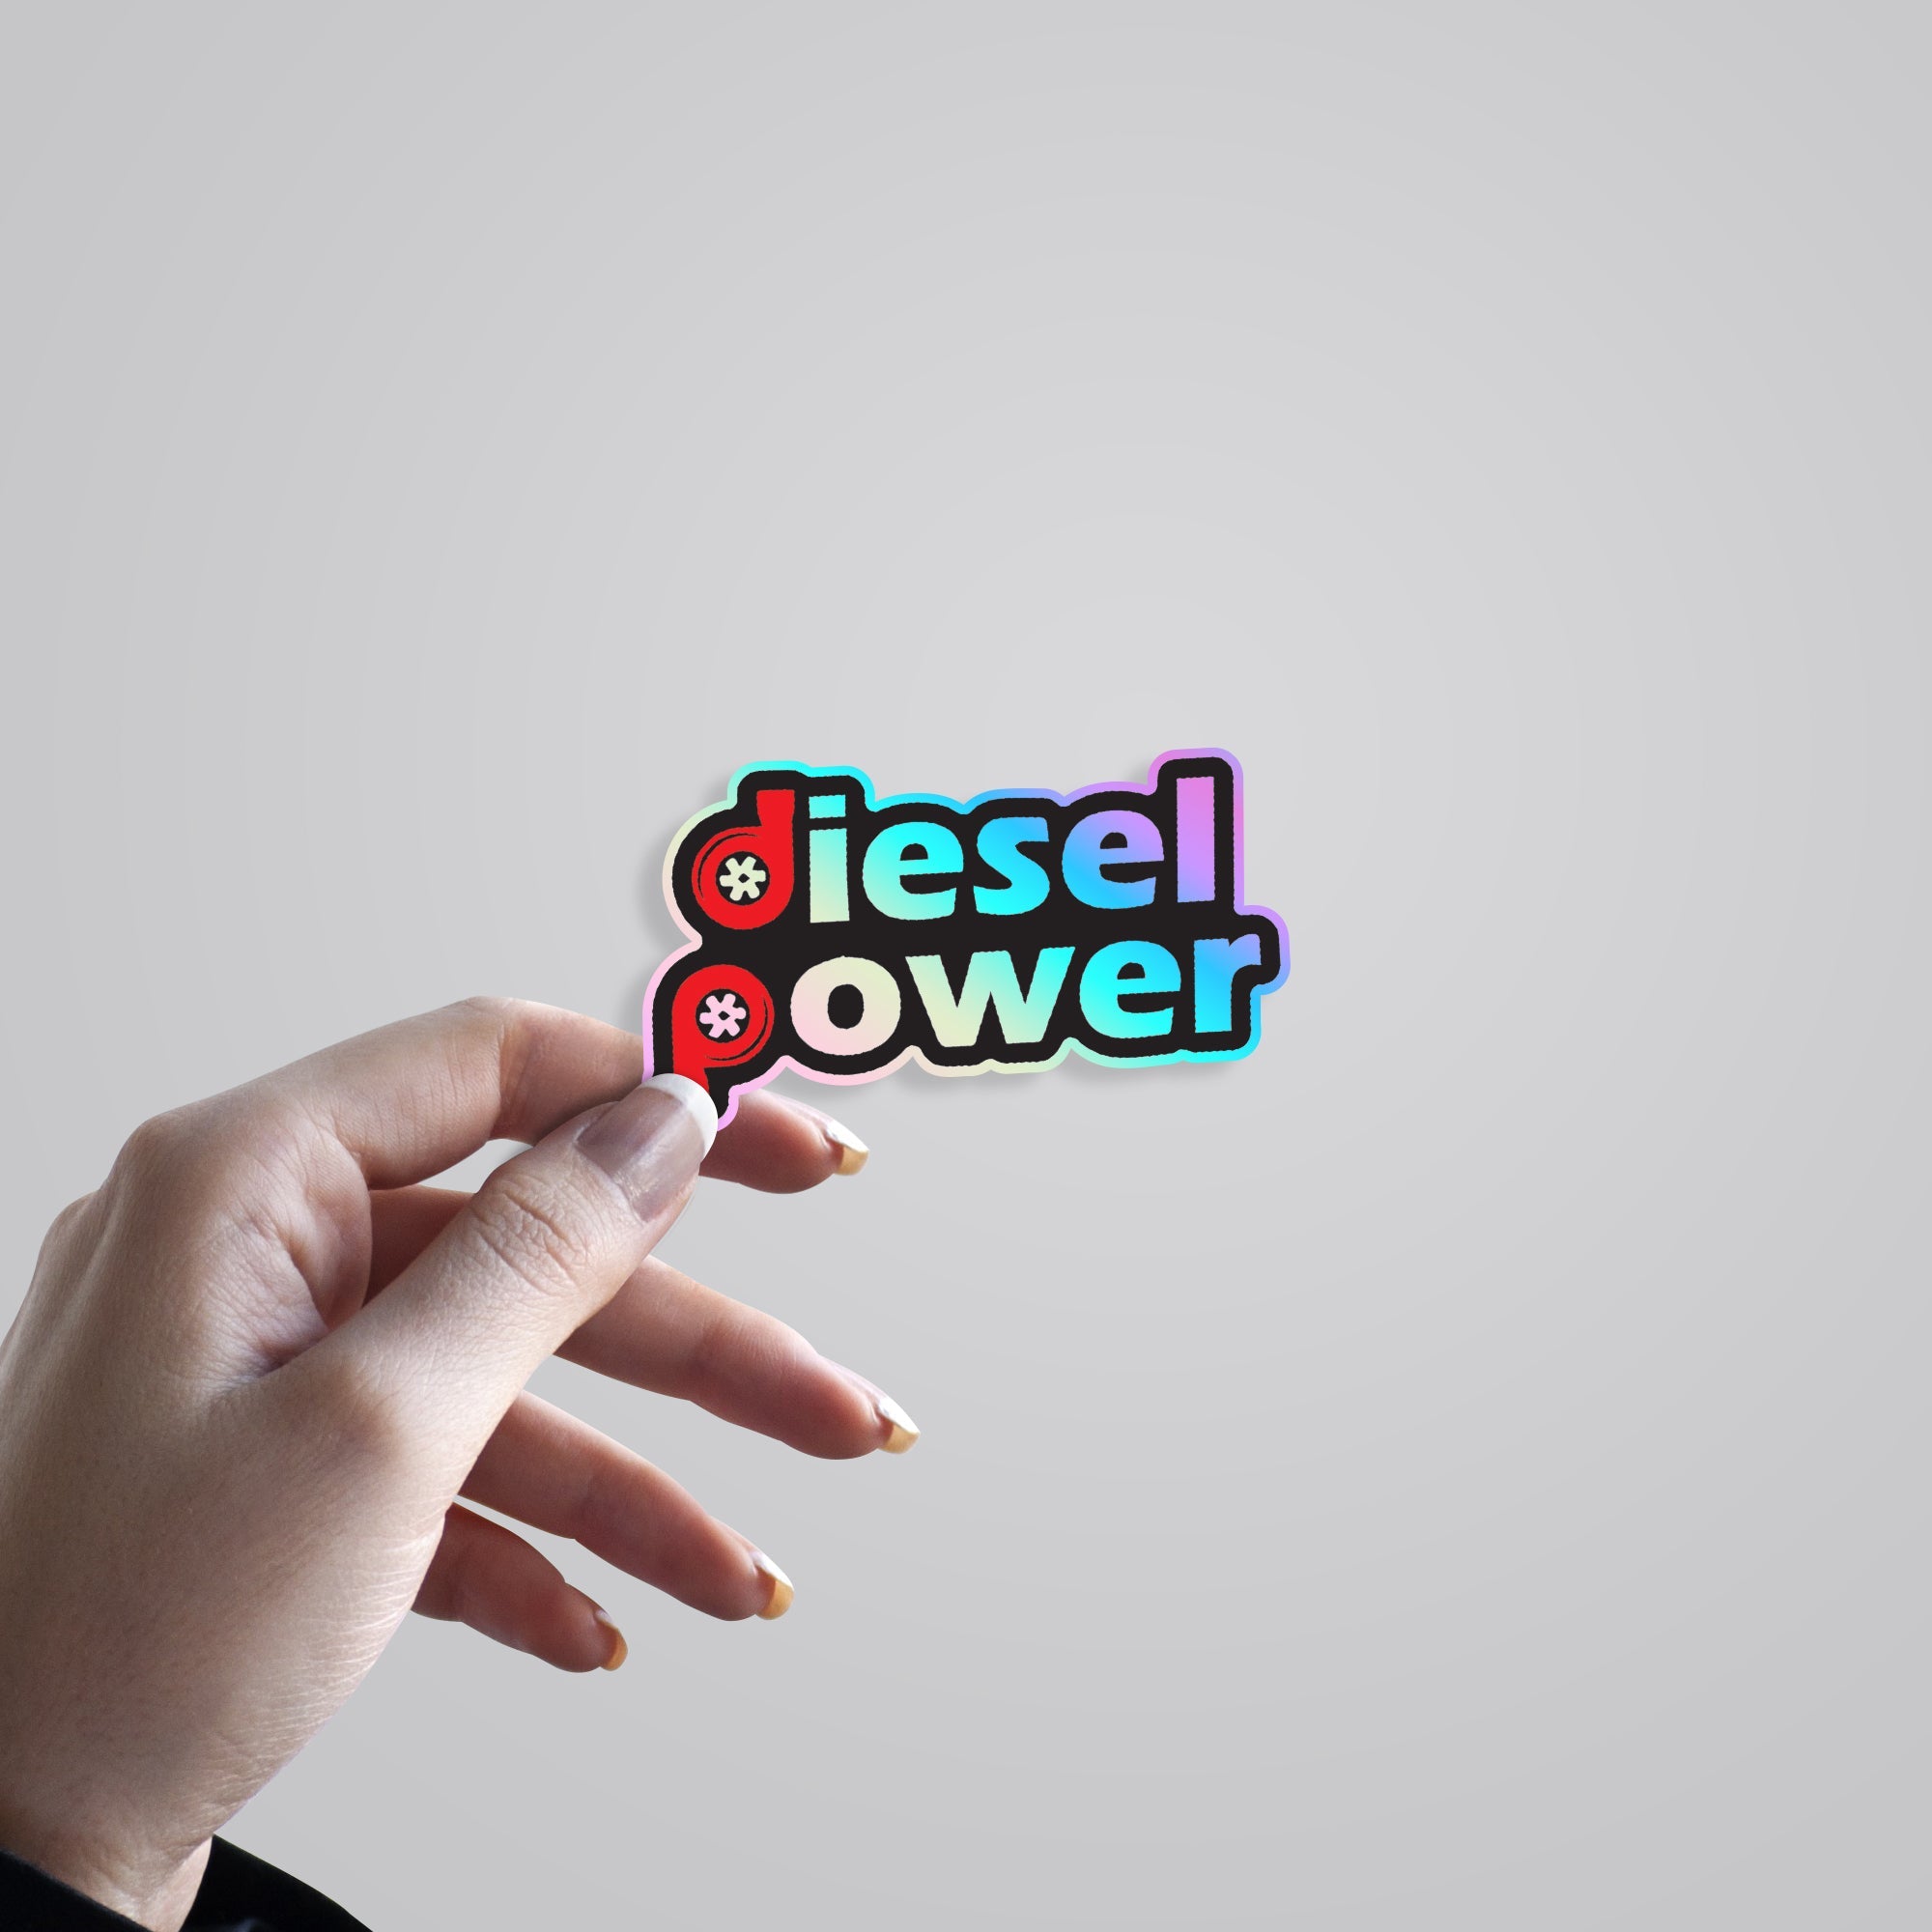 Diesel Power Holographic Stickers